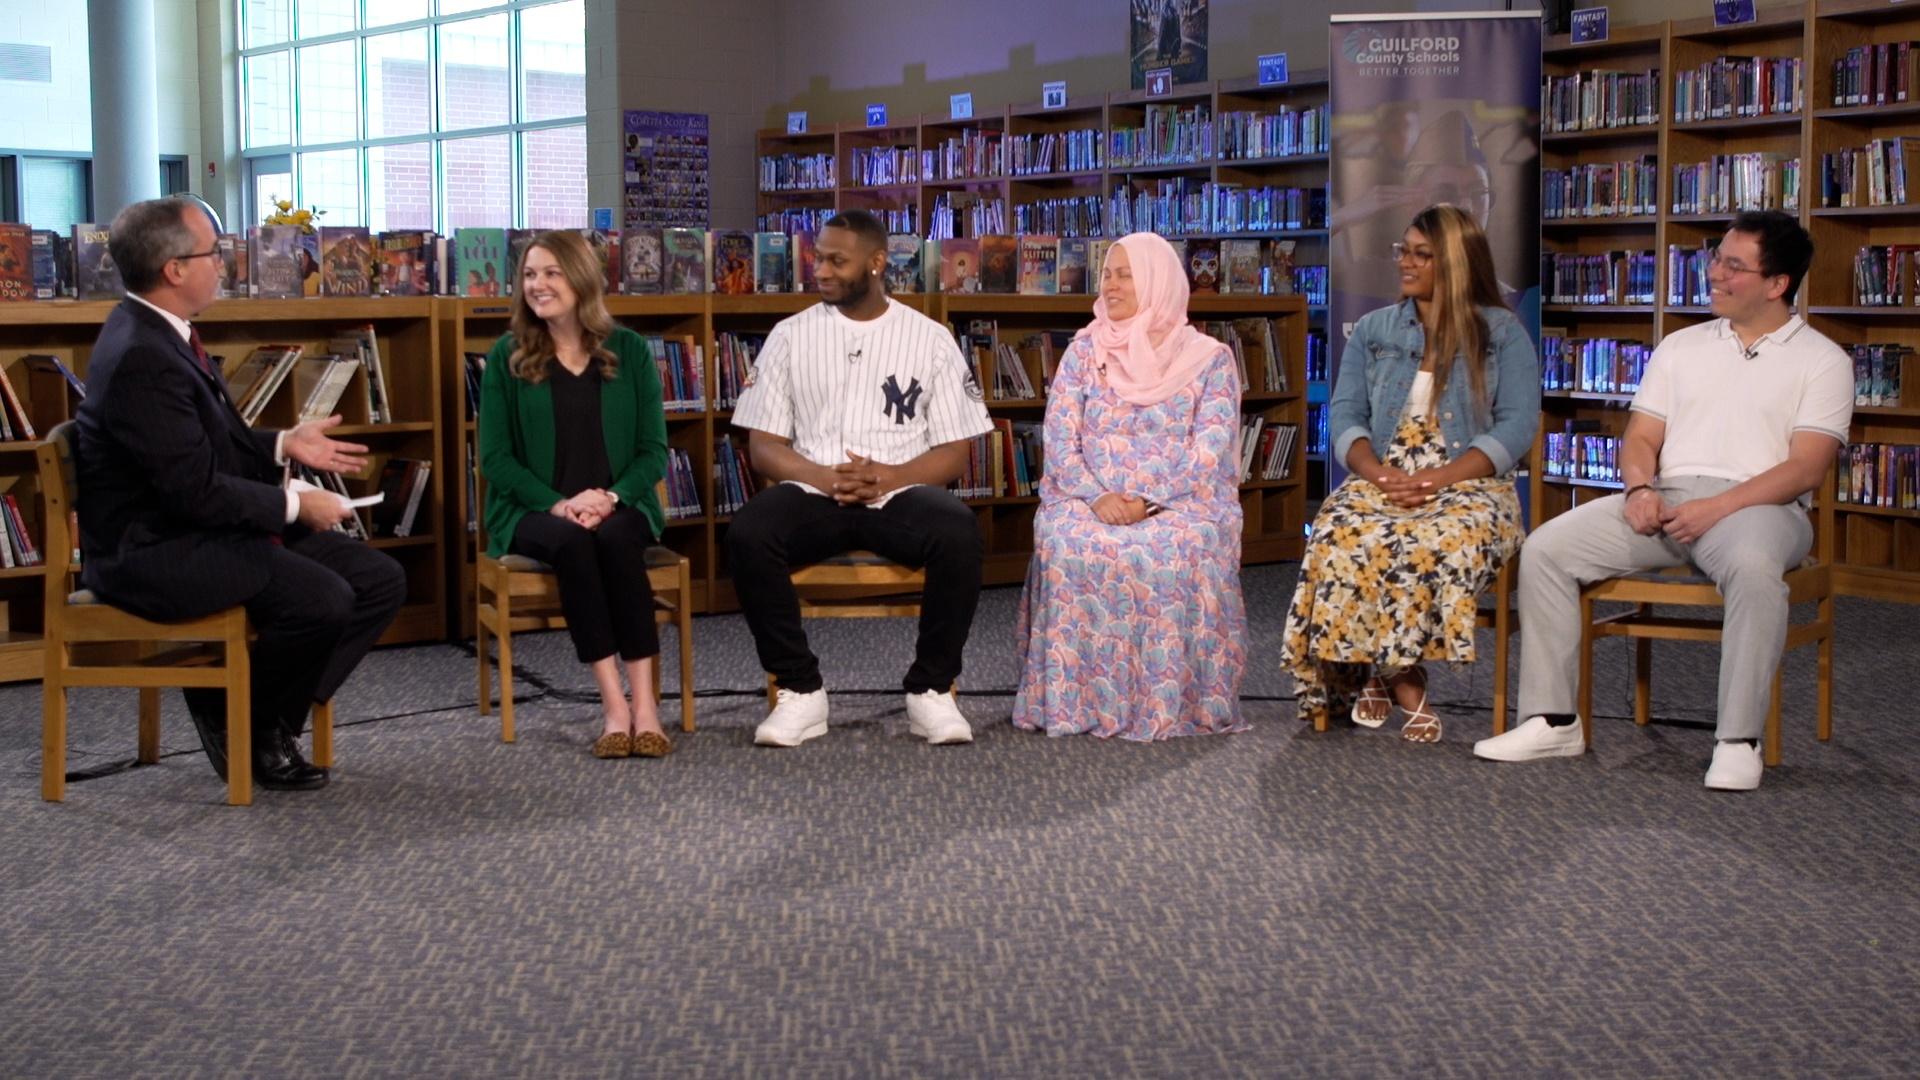 Host Kelly McCullen and panel of educators seated in a semicircle in a library